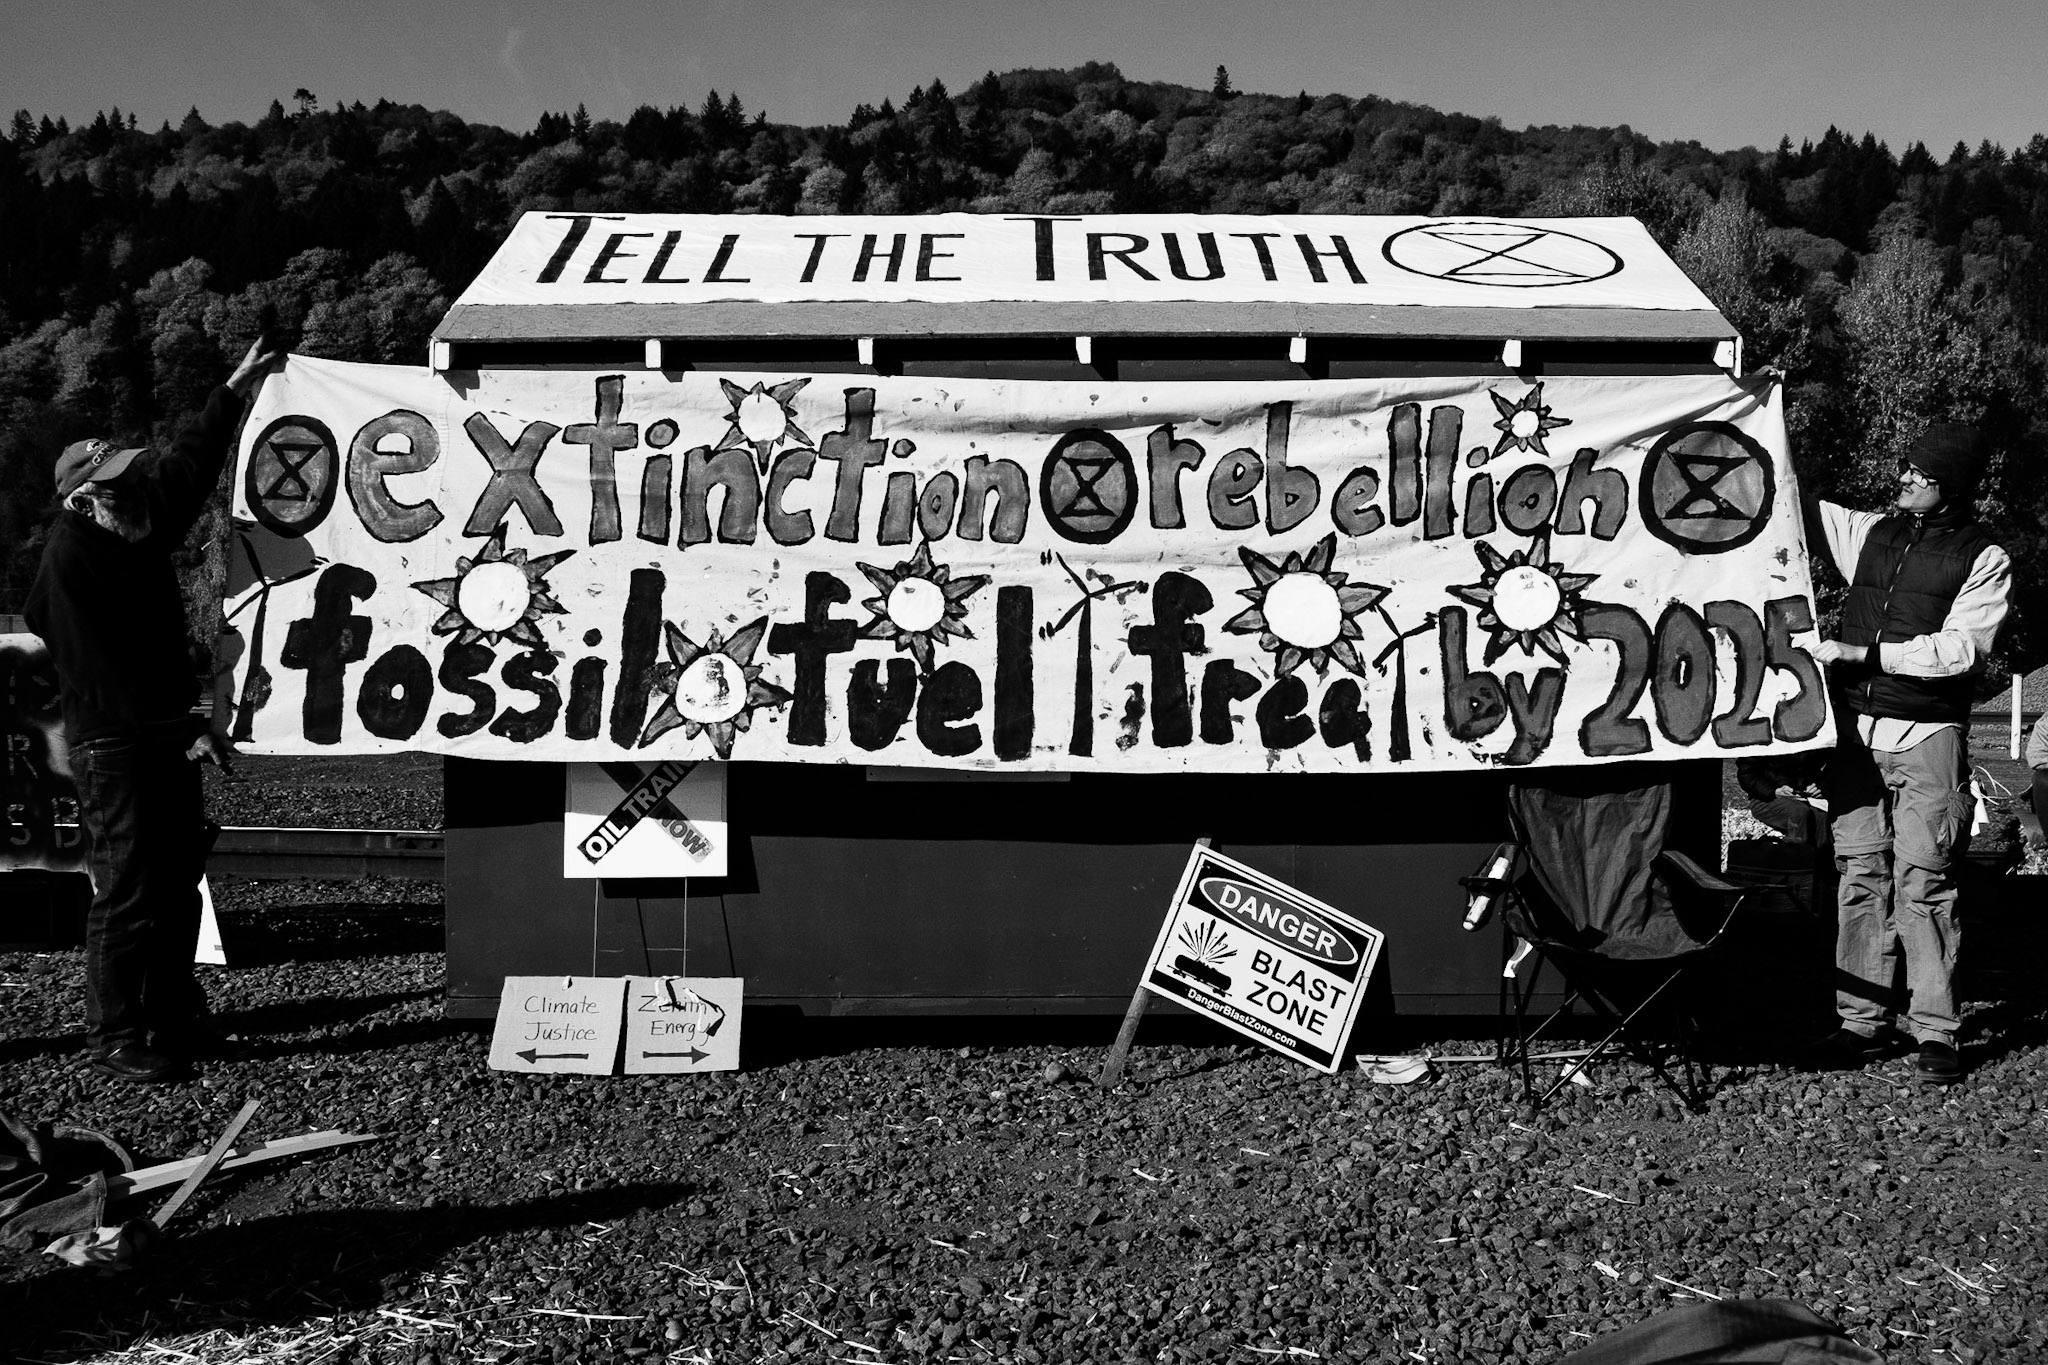 Banners: Tell the Truth; Extinction Rebellion, Fossil Fuel Free by 2020